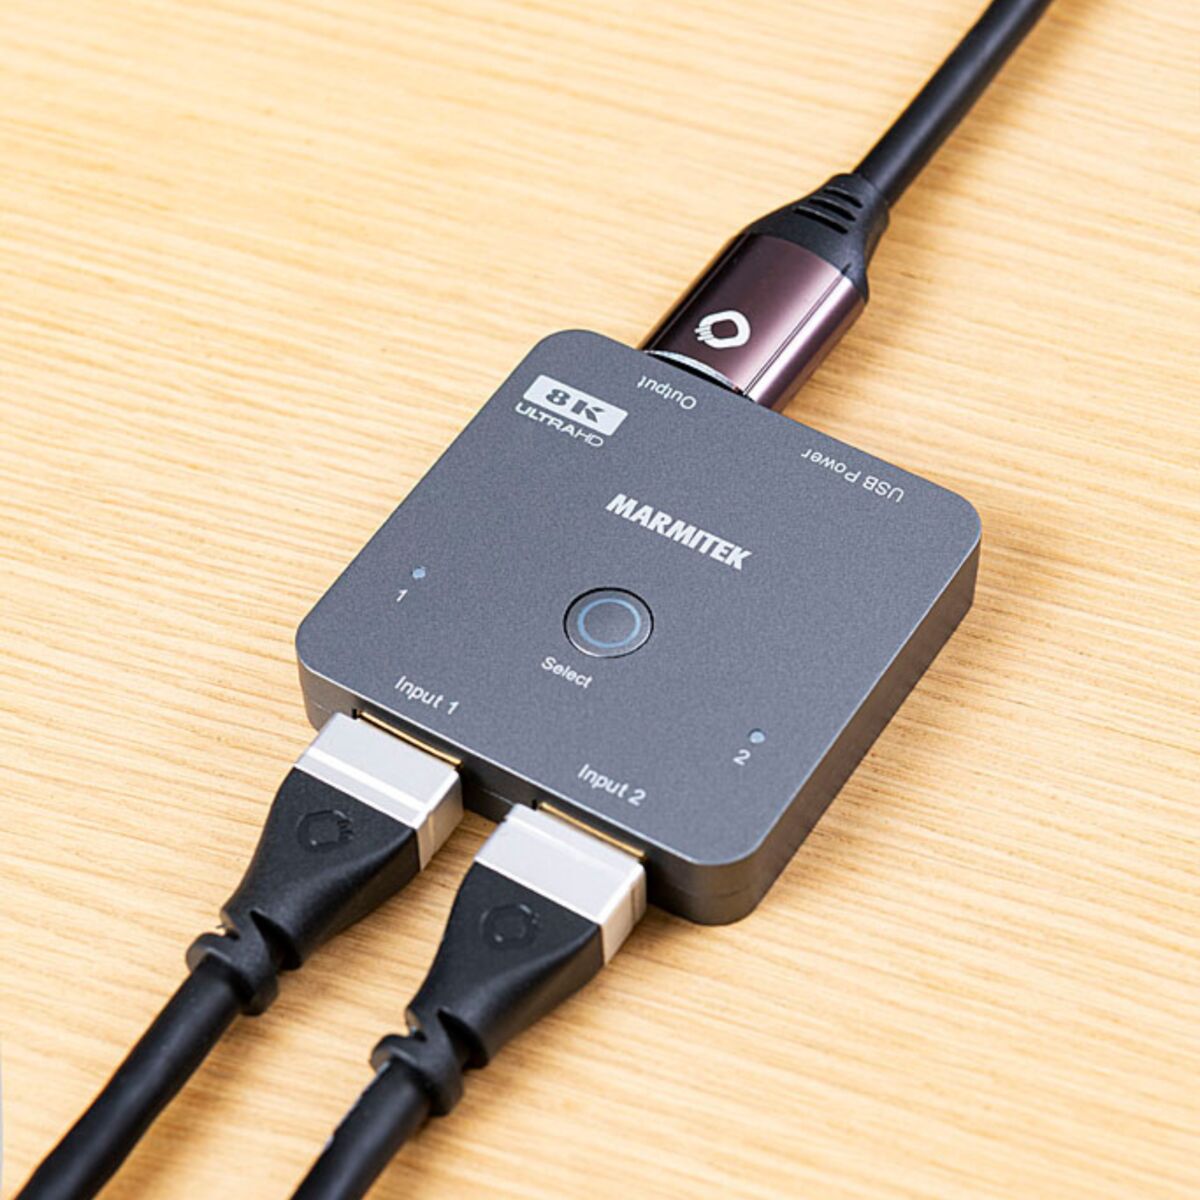 Connect 720 - HDMI switch 4K 120Hz, 8K 60Hz - 2 in / 1 out - Ambiance Image of Connect 720 on a table with 2 HDMI cables in and 1 HDMI cable out | Marmitek